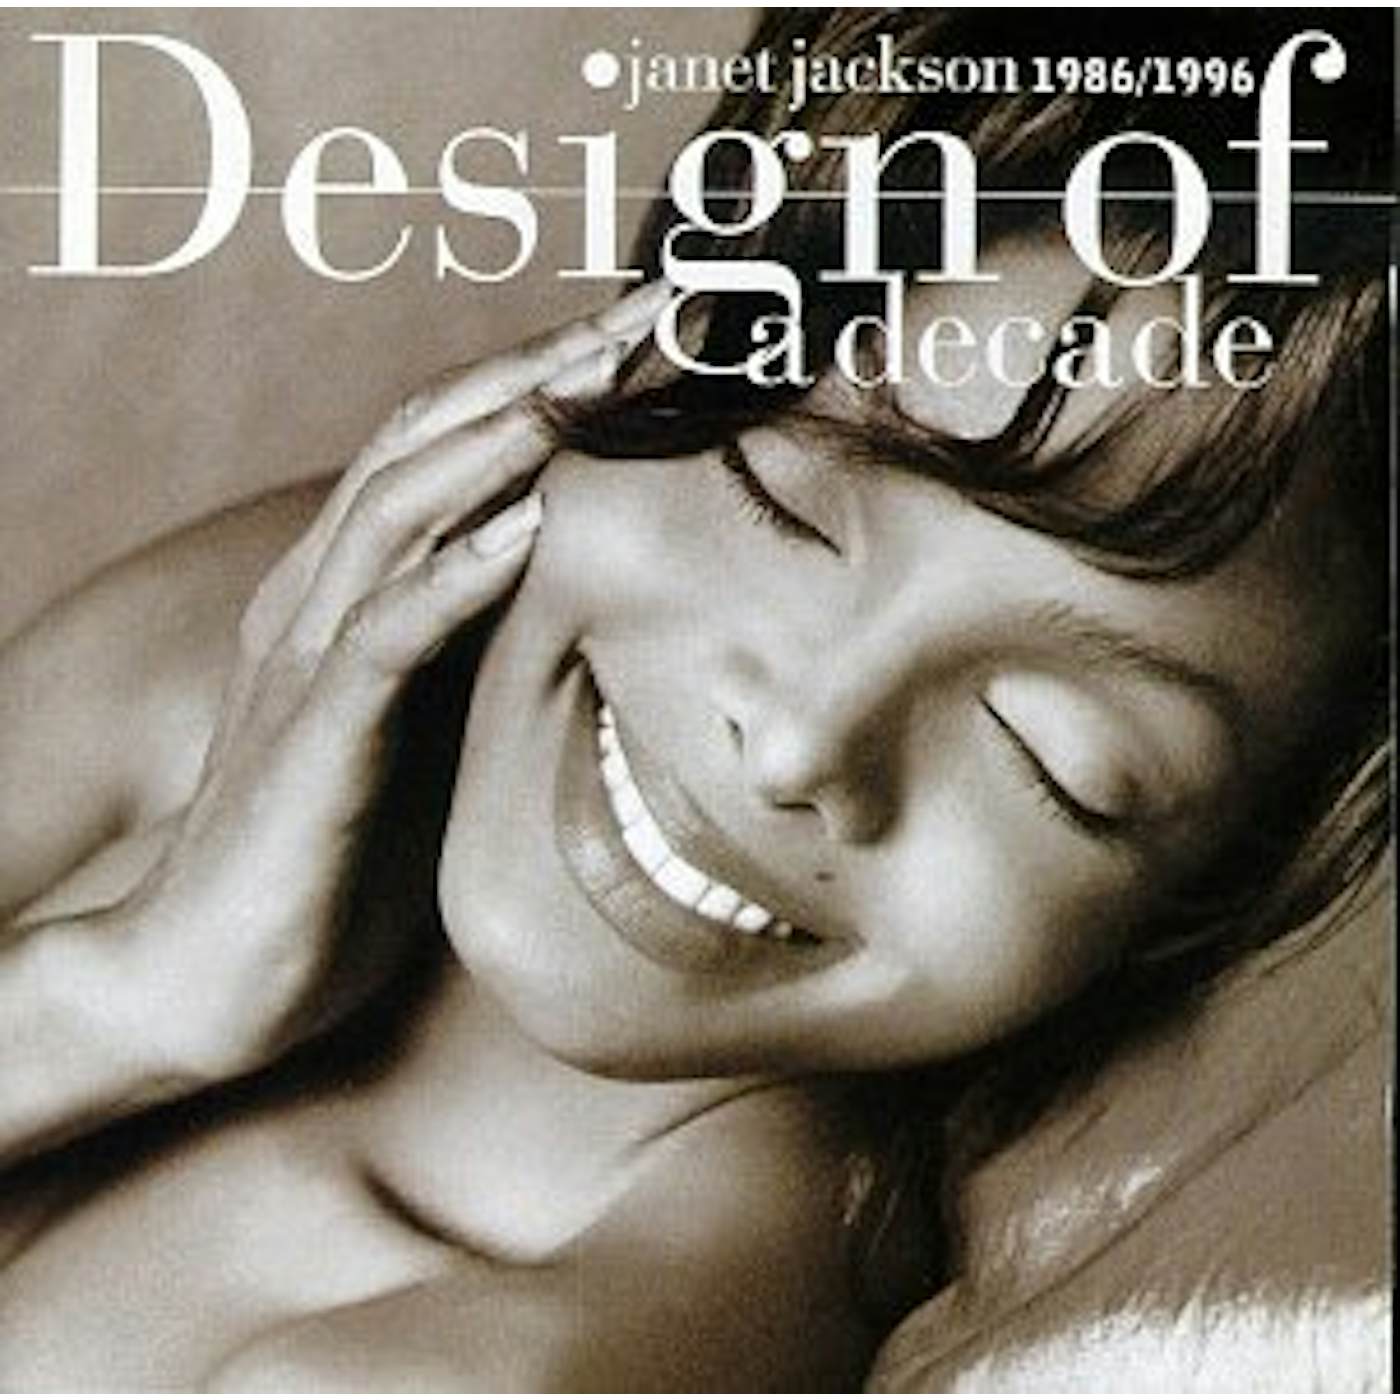 Janet Jackson DESIGN OF A DECADE 1986-1996: GREATEST HITS CD